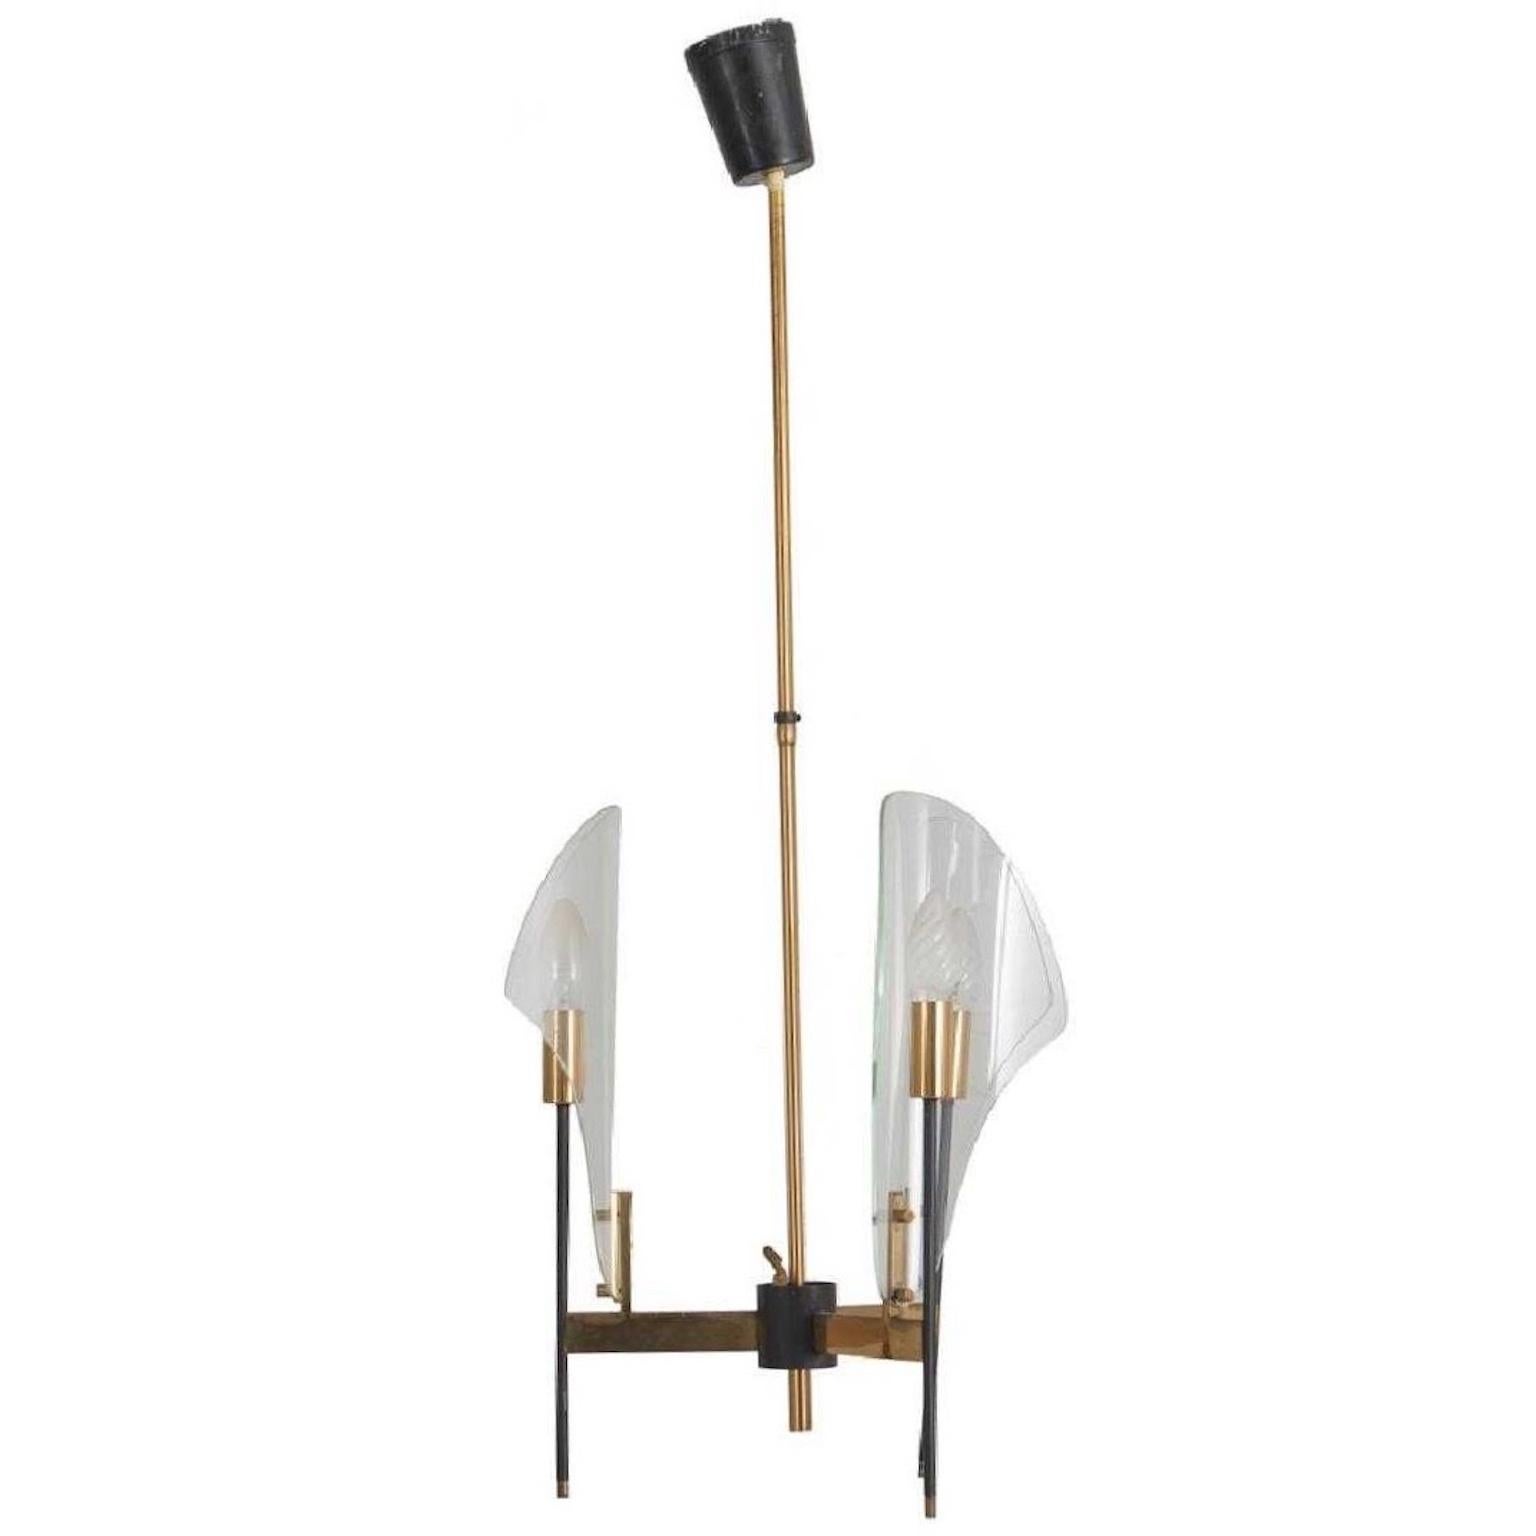 Long stem pendant chandelier by Luigi Molin, circa 1957, with three single lights of brass on a black enameled slender stem within a bent glass reflector all radiating from a central cluster hub. Rewired and ready to install. See our separate